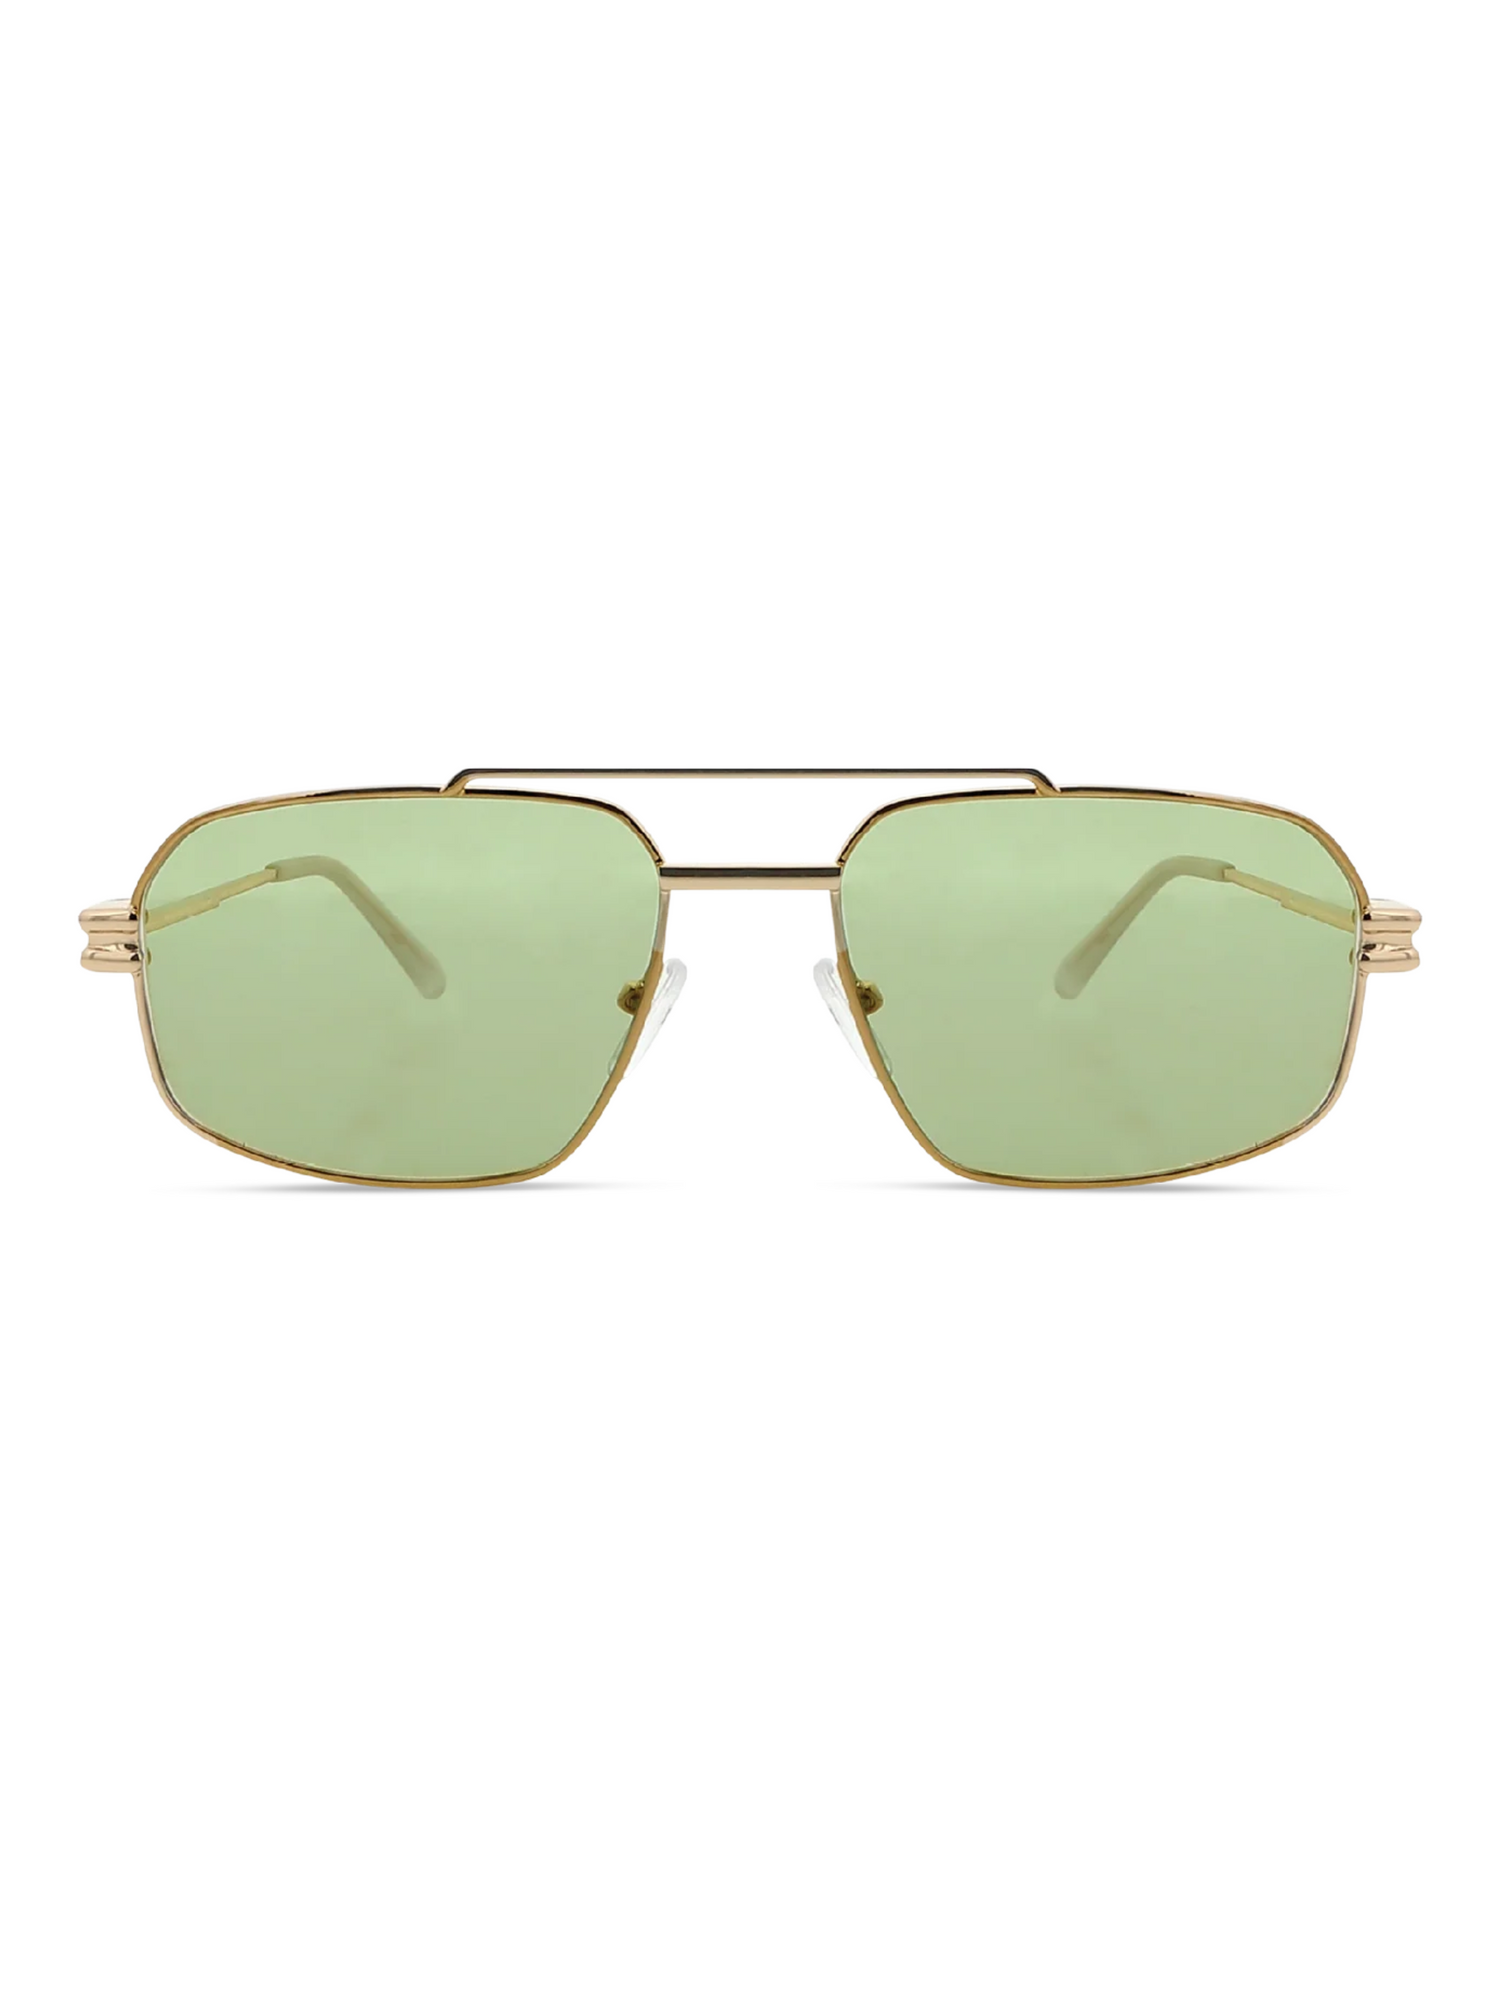 BANBE HEIDI SUNGLASSES IN GOLD OLIVE - THE HIP EAGLE BOUTIQUE